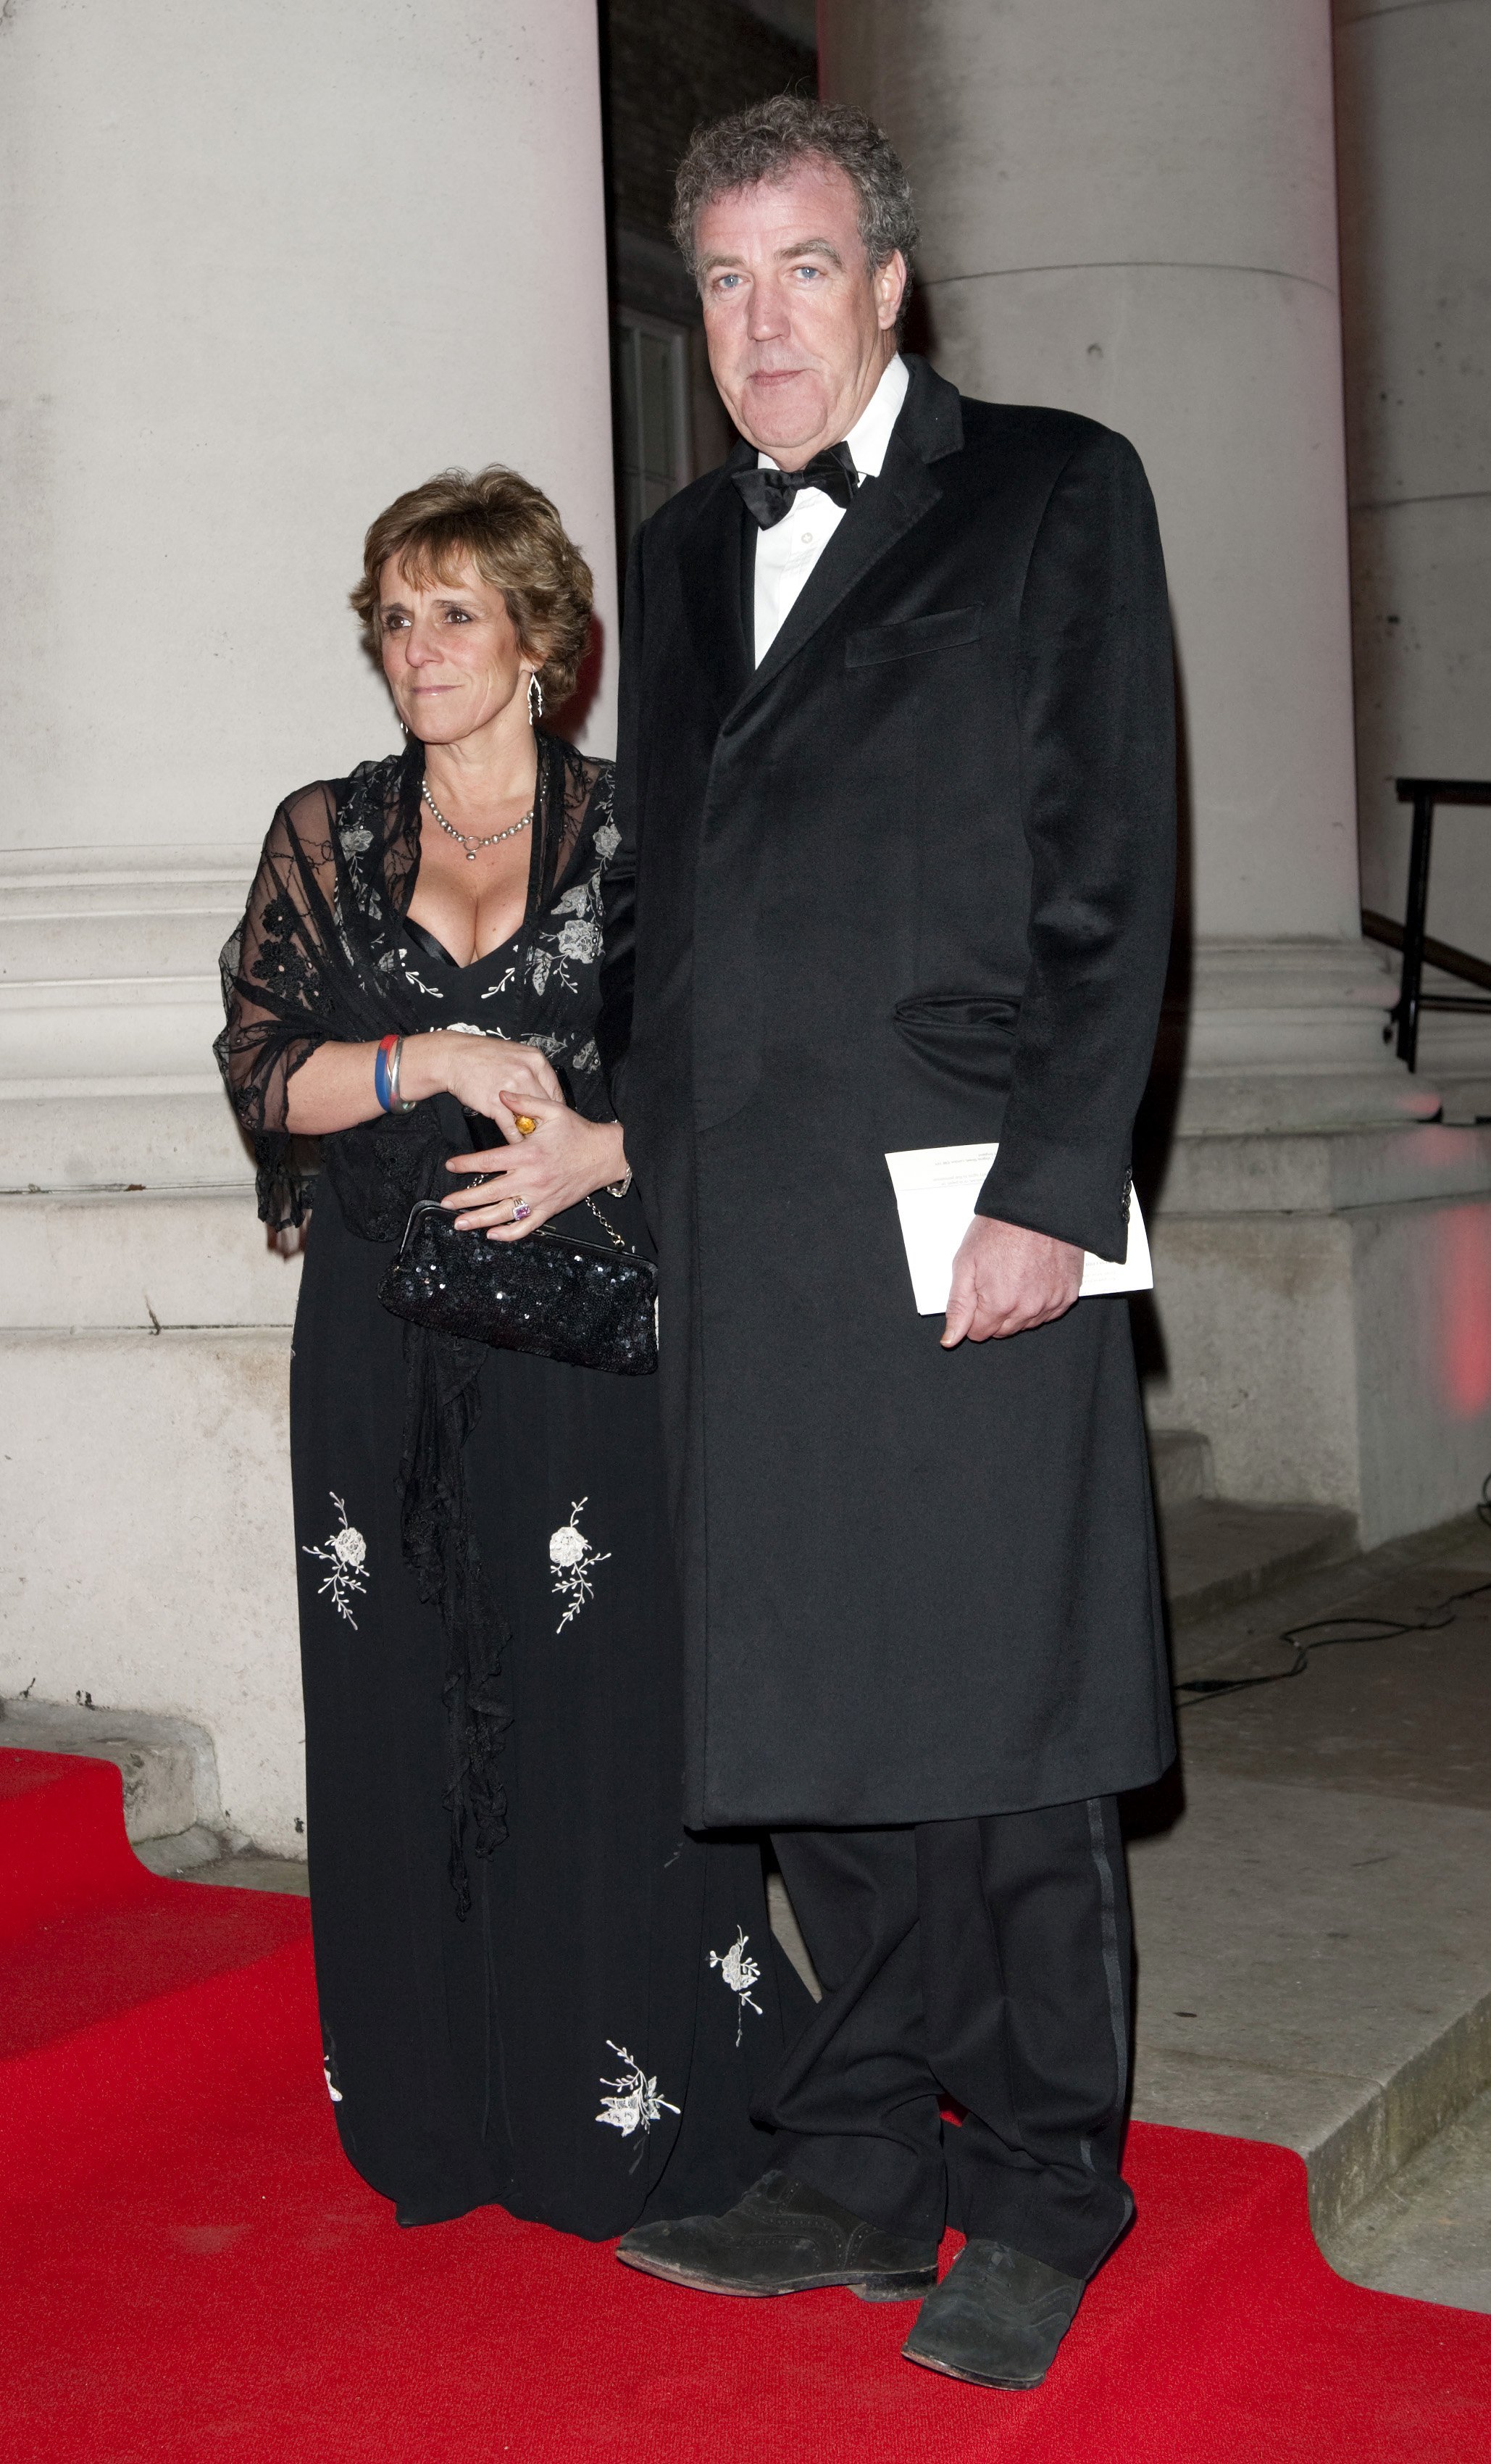 Jeremy Clarkson And Frances Cain are pictured as they arrive at the Sun Military Awards 'A Night Of Heroes' at the Imperial War Museum, on an unspecified date, London, England | Source: Getty Images